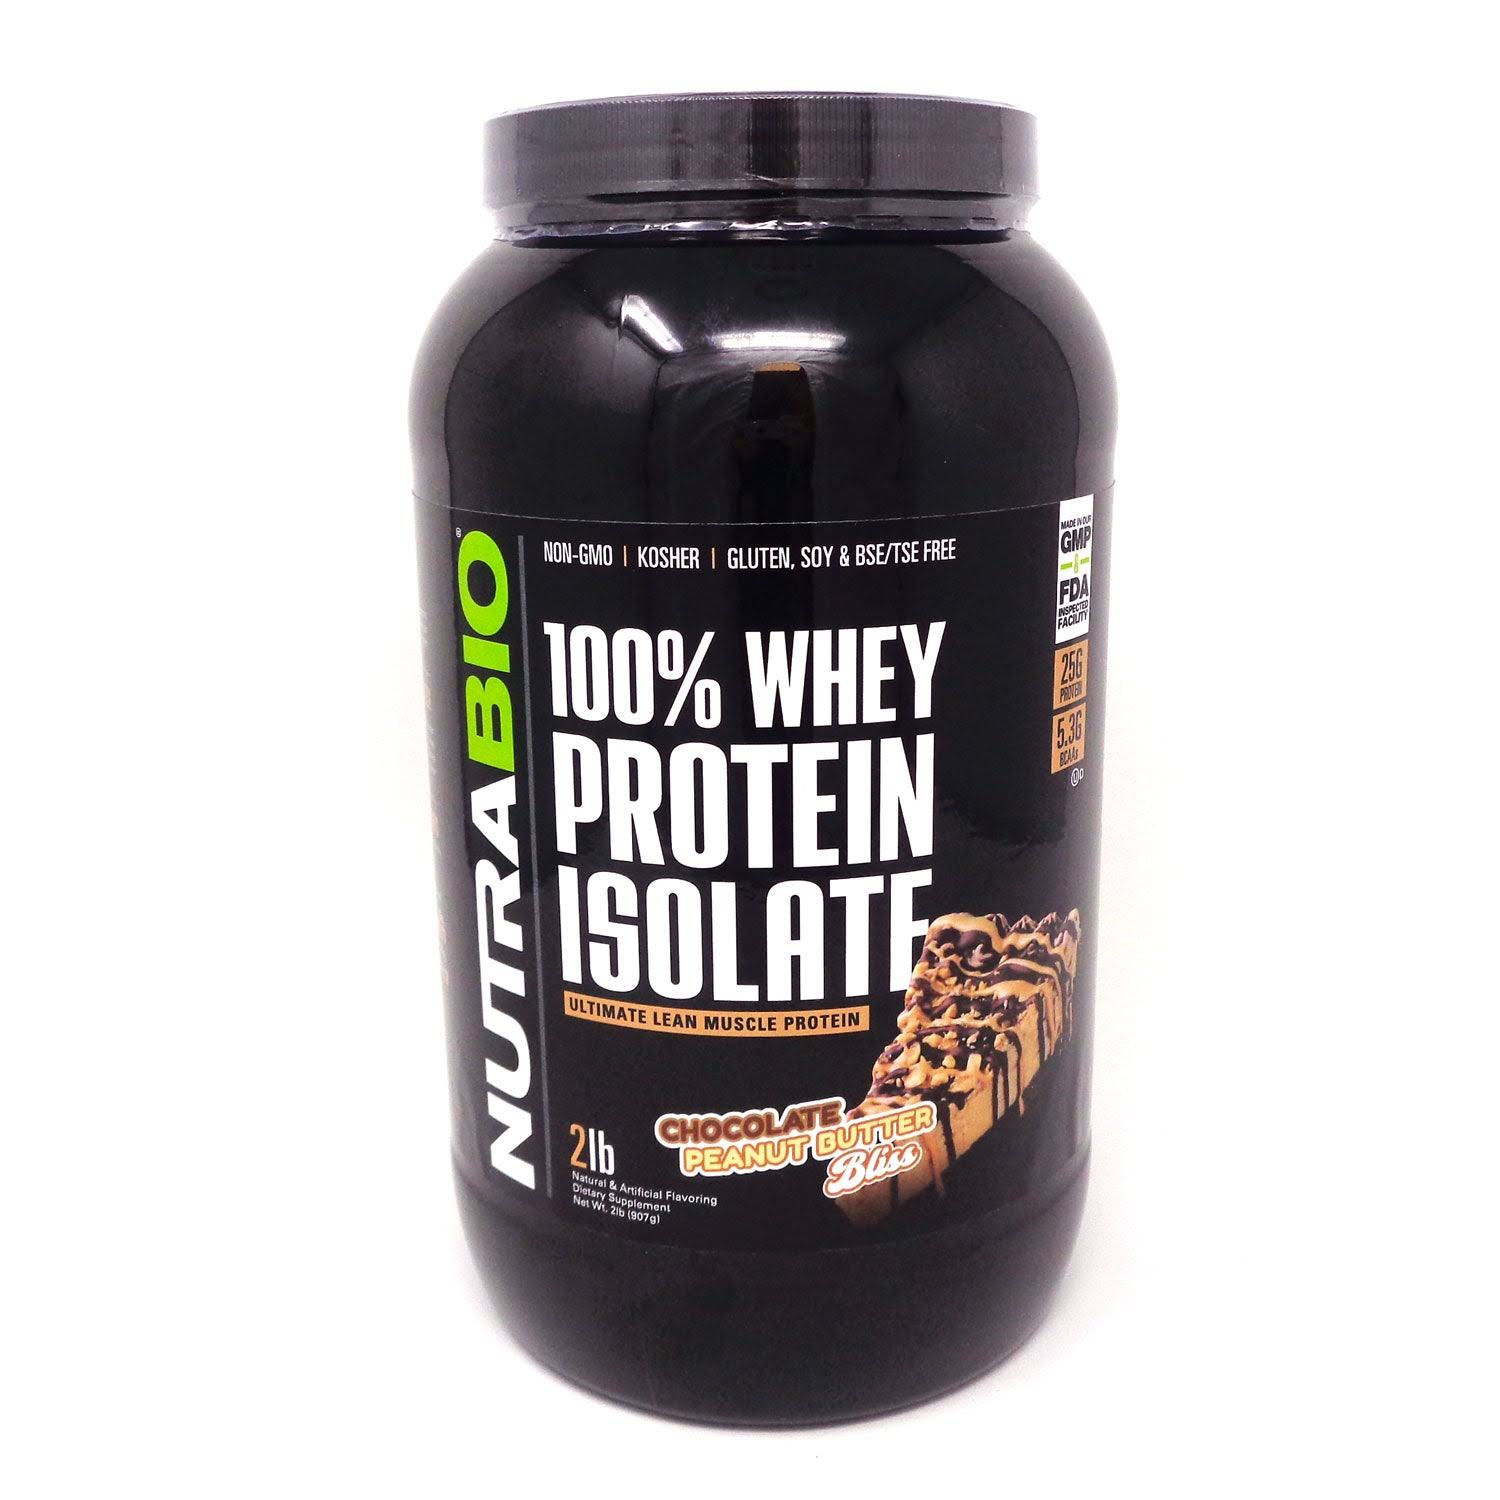 NutraBio 100% Whey Protein Isolate (907g) Chocolate Peanut Butter